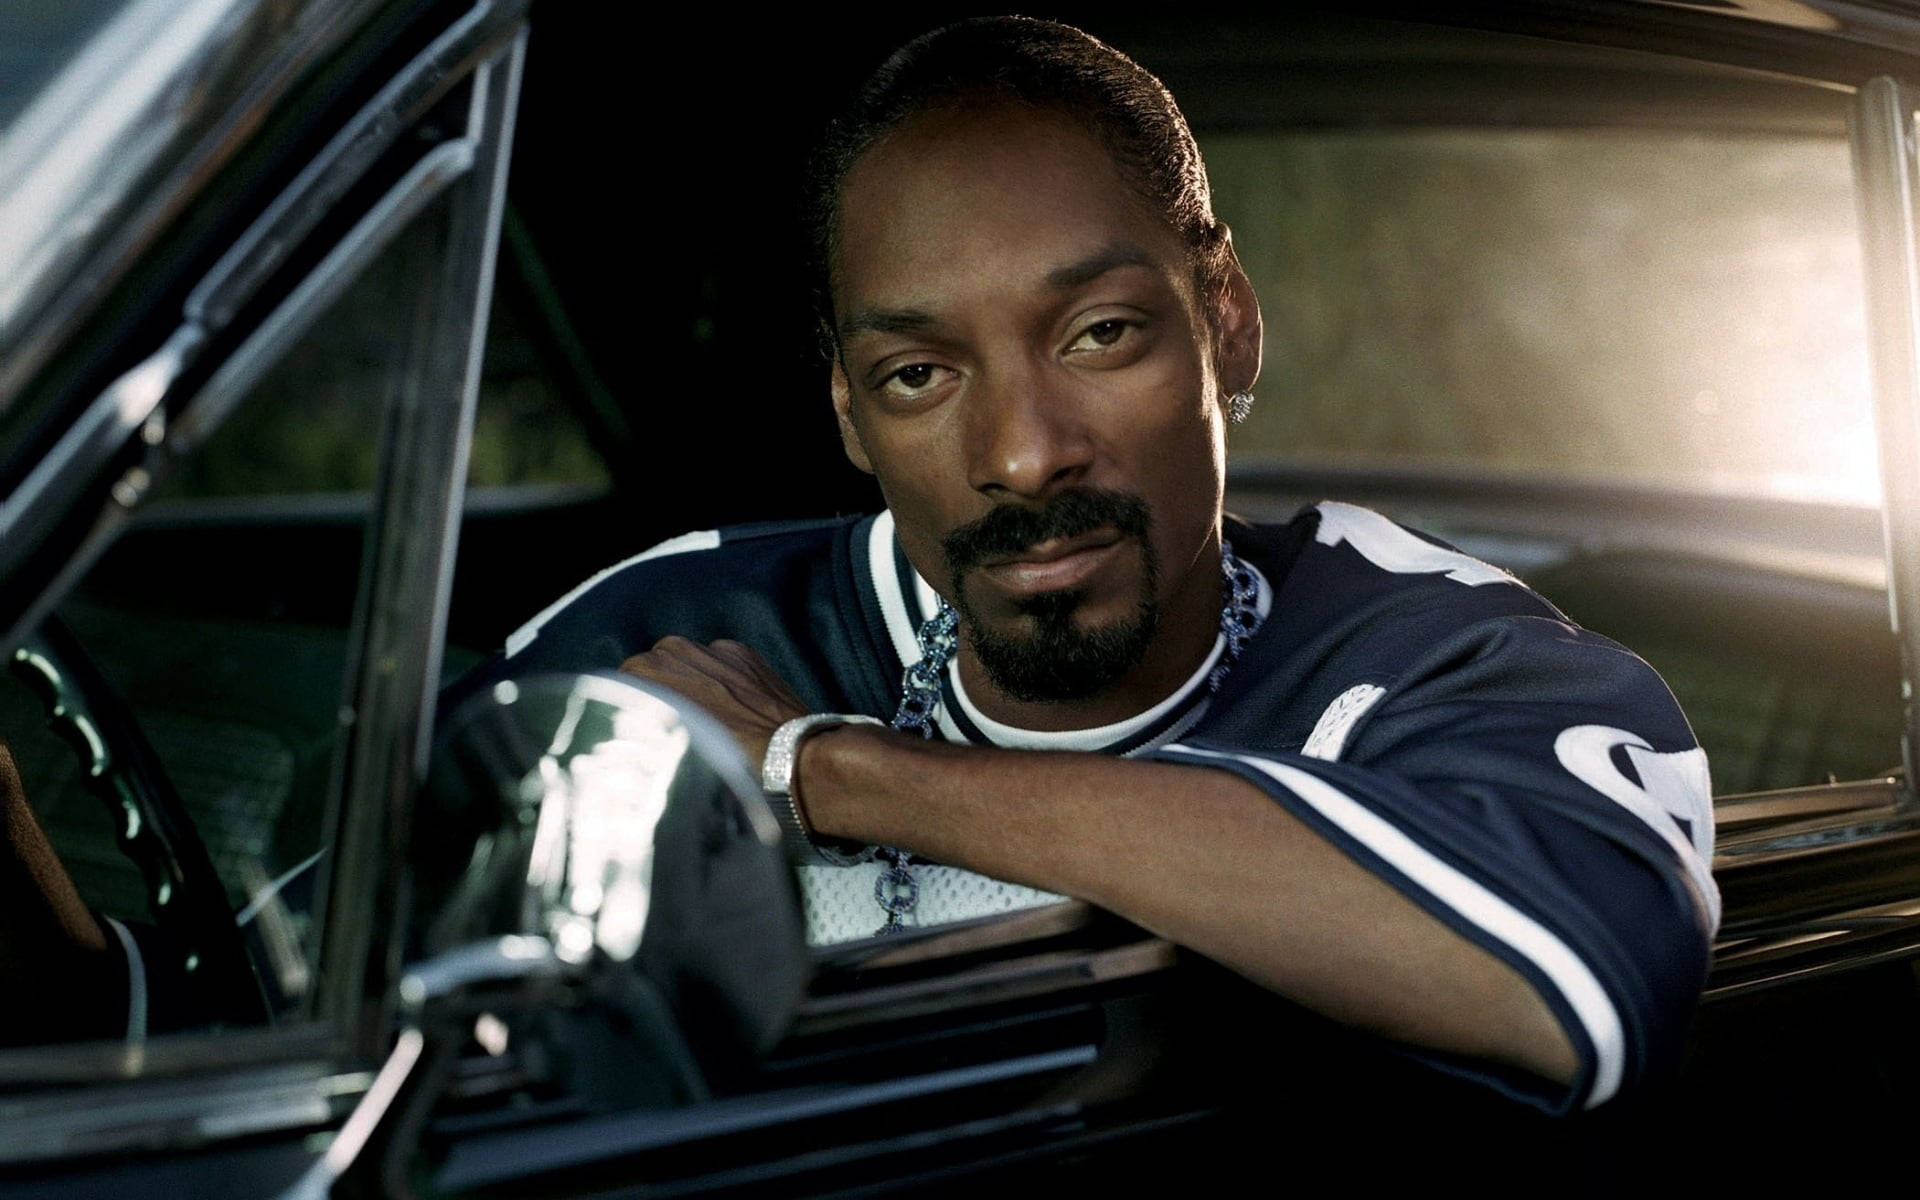 Snoop Dogg Chilling In A Car Background